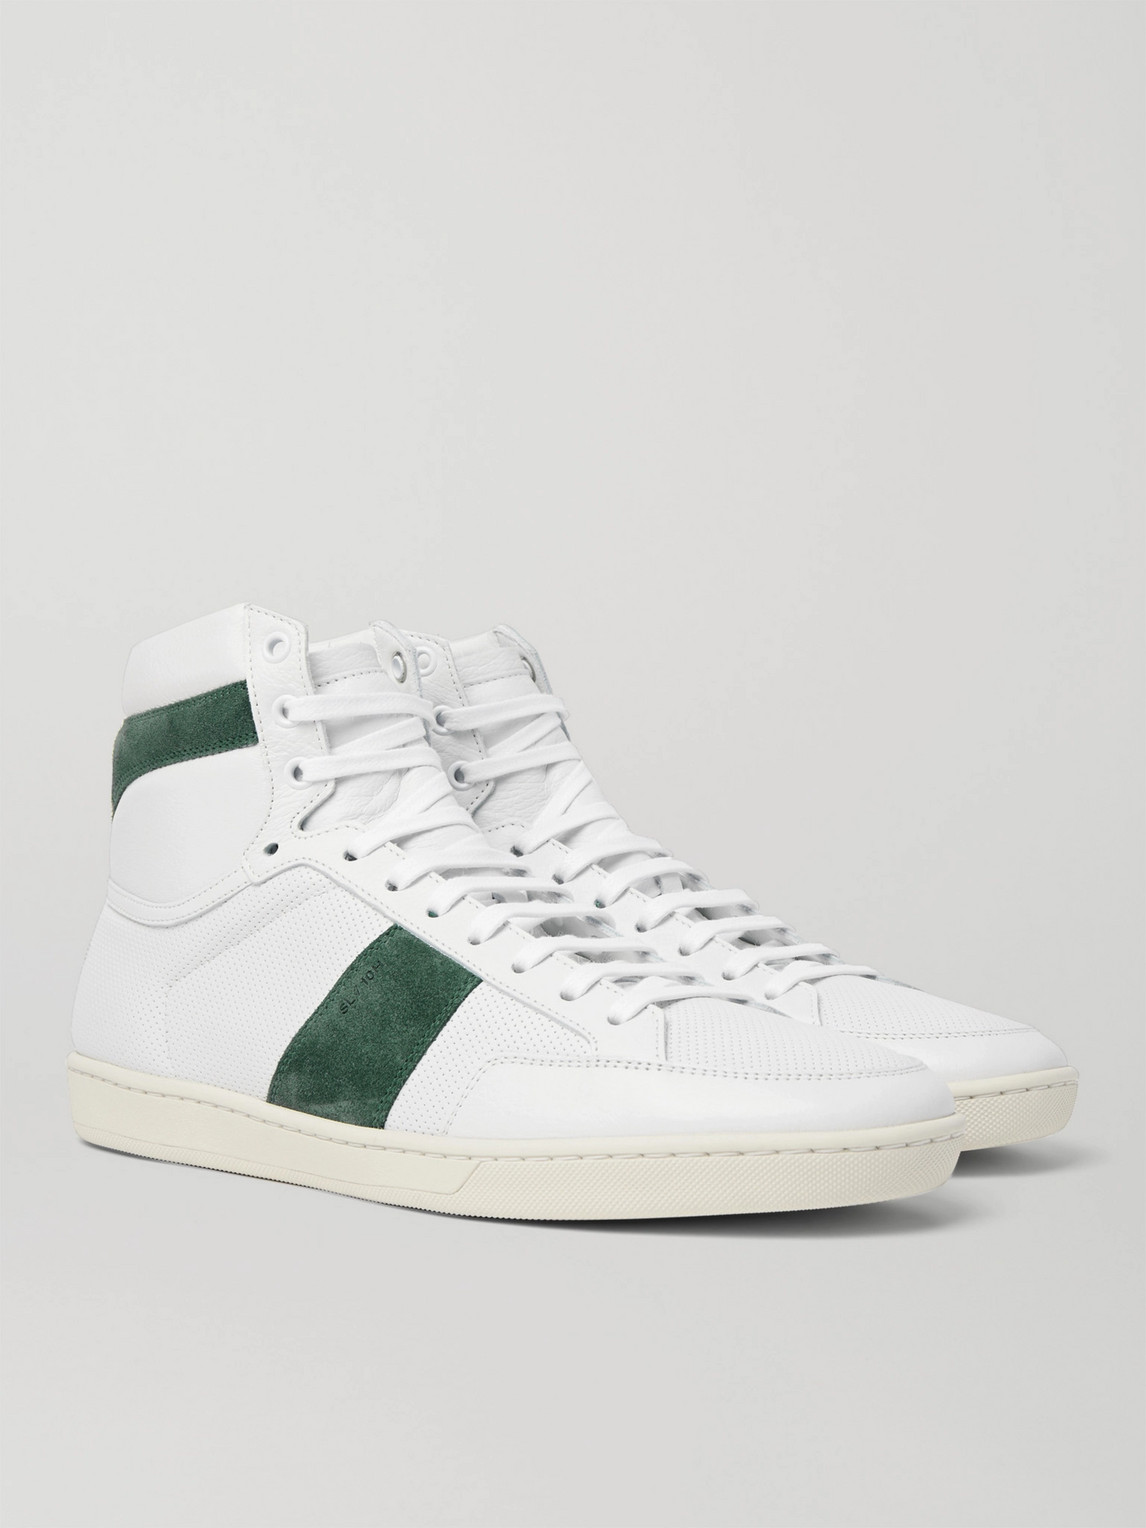 SAINT LAURENT SL/10 SUEDE-TRIMMED PERFORATED LEATHER HIGH-TOP trainers